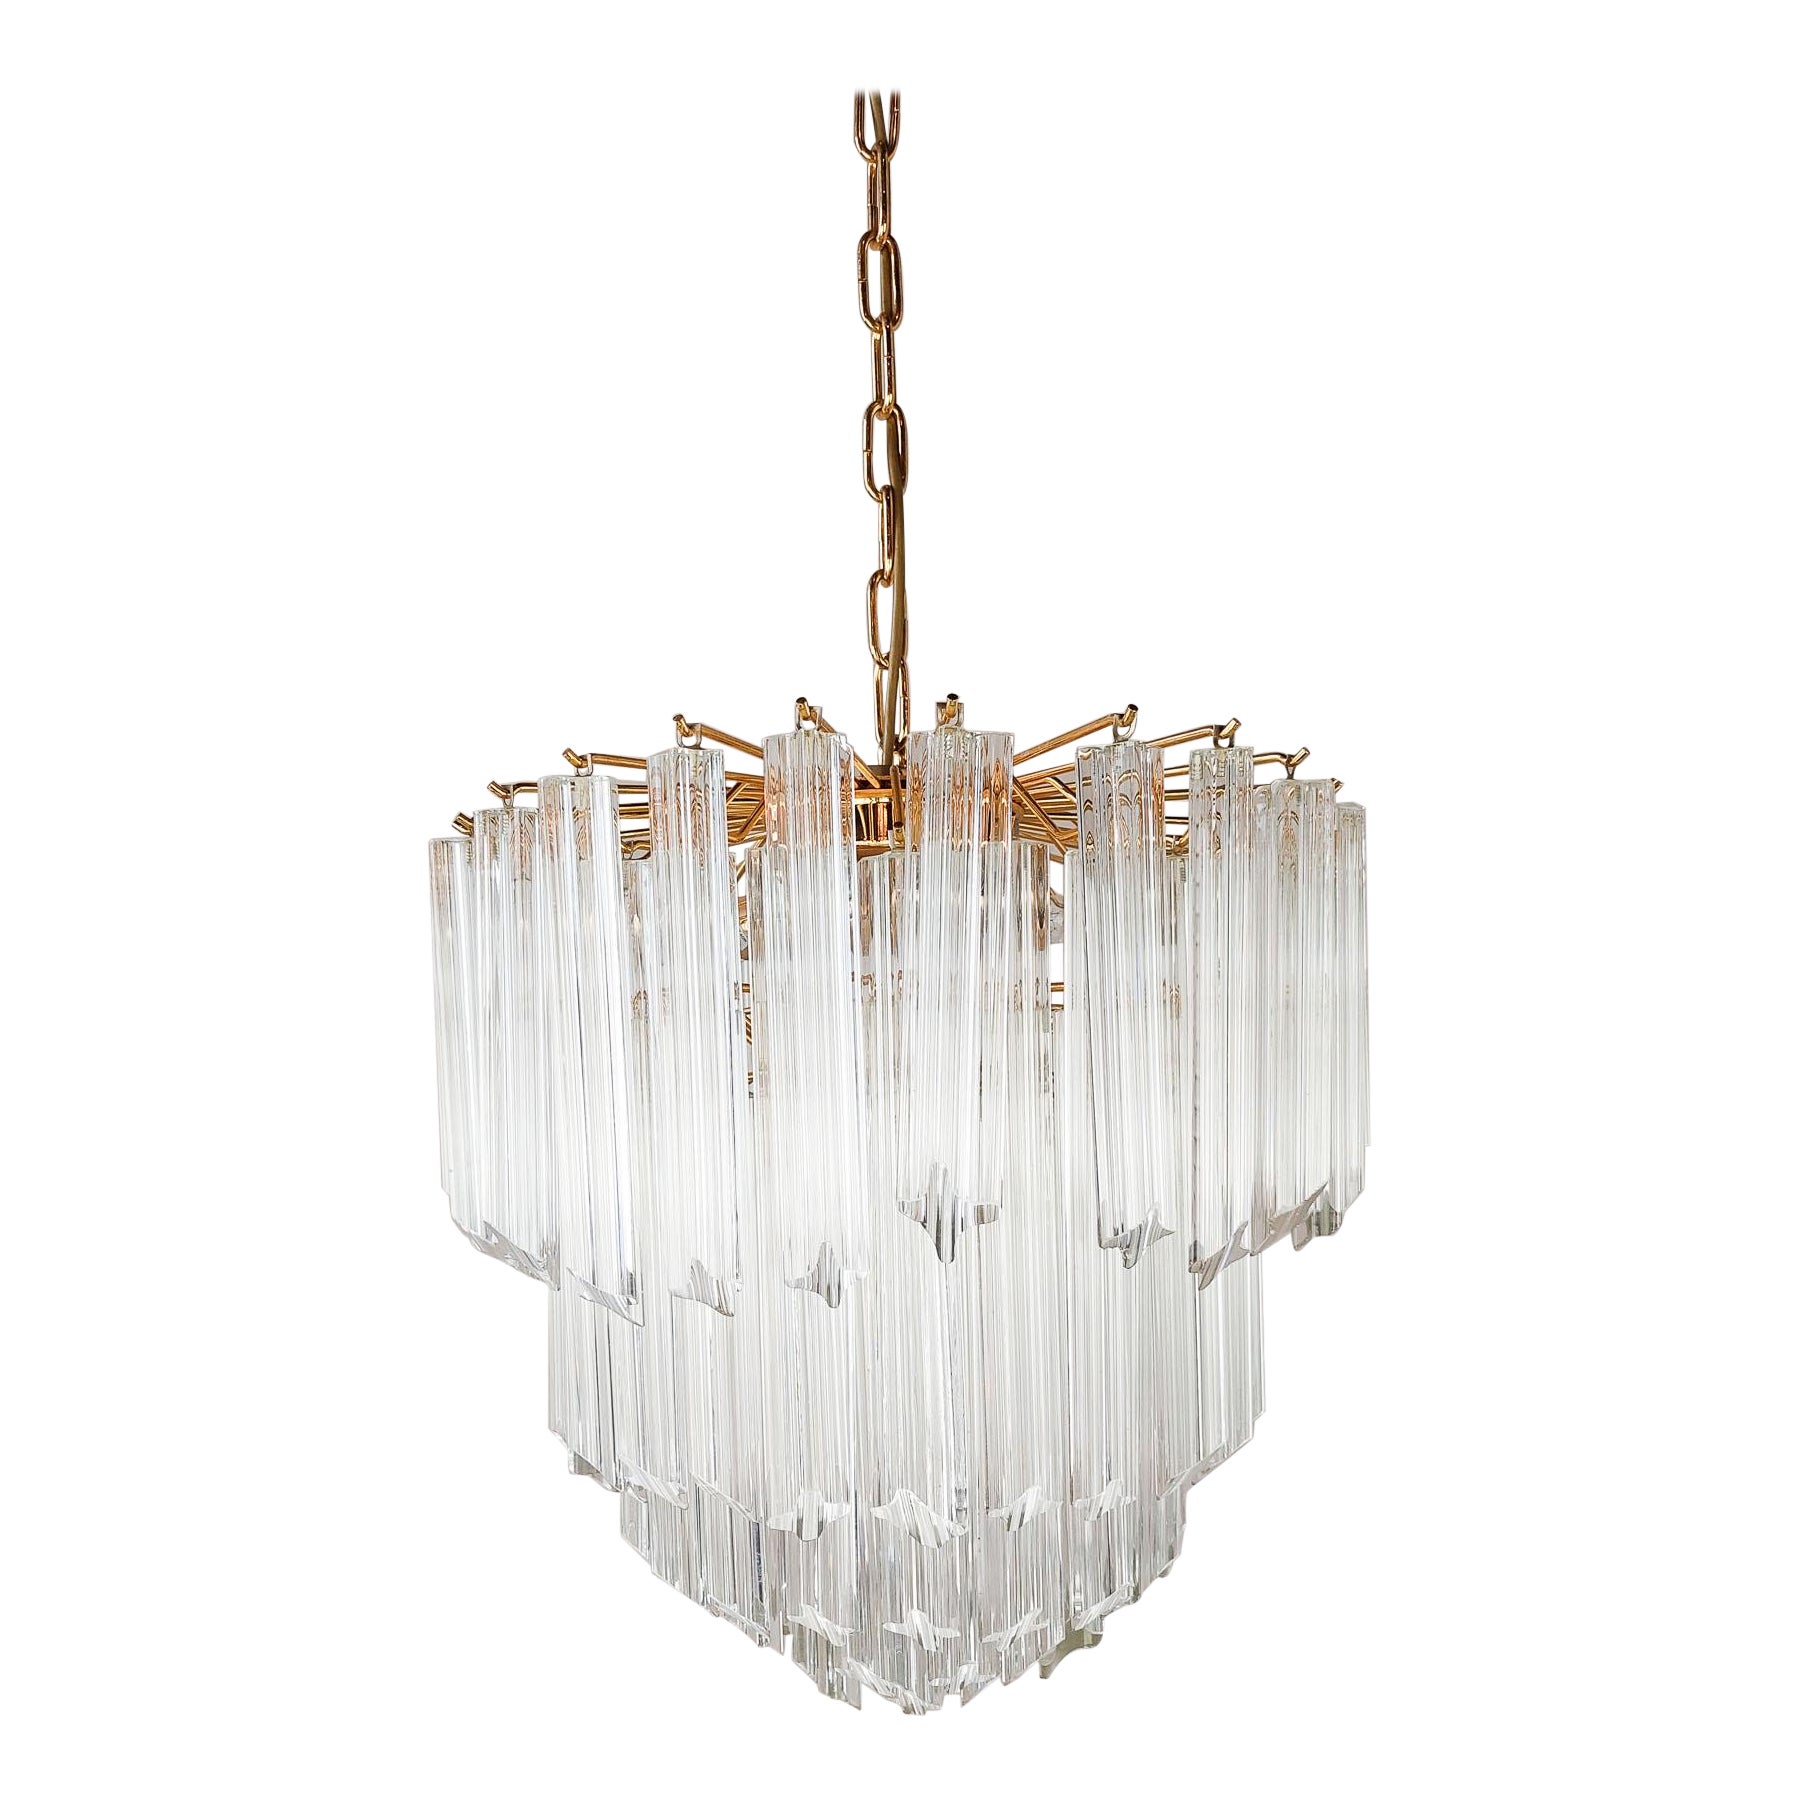 Vintage Glass Chandelier by Venini from the 1970s For Sale